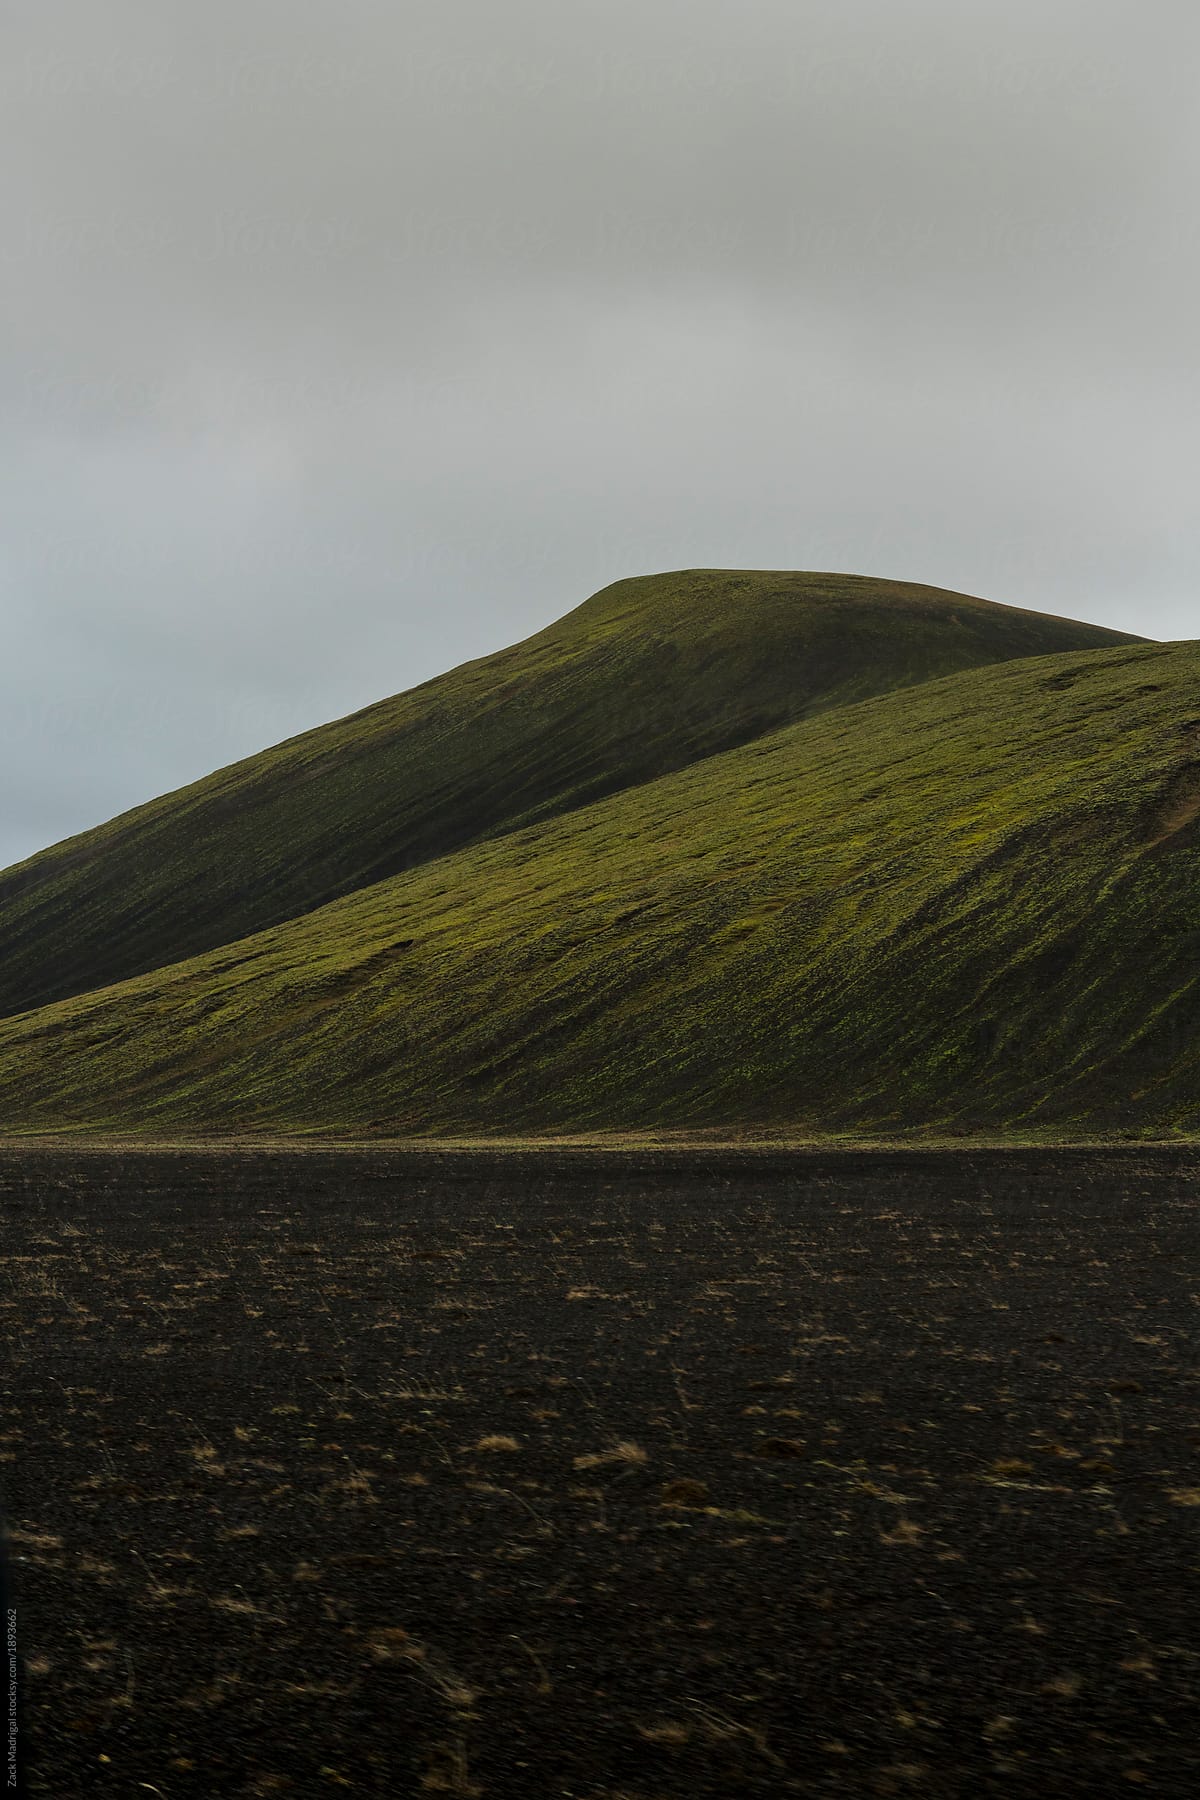 A Colorful Hill In The Barren Landscape